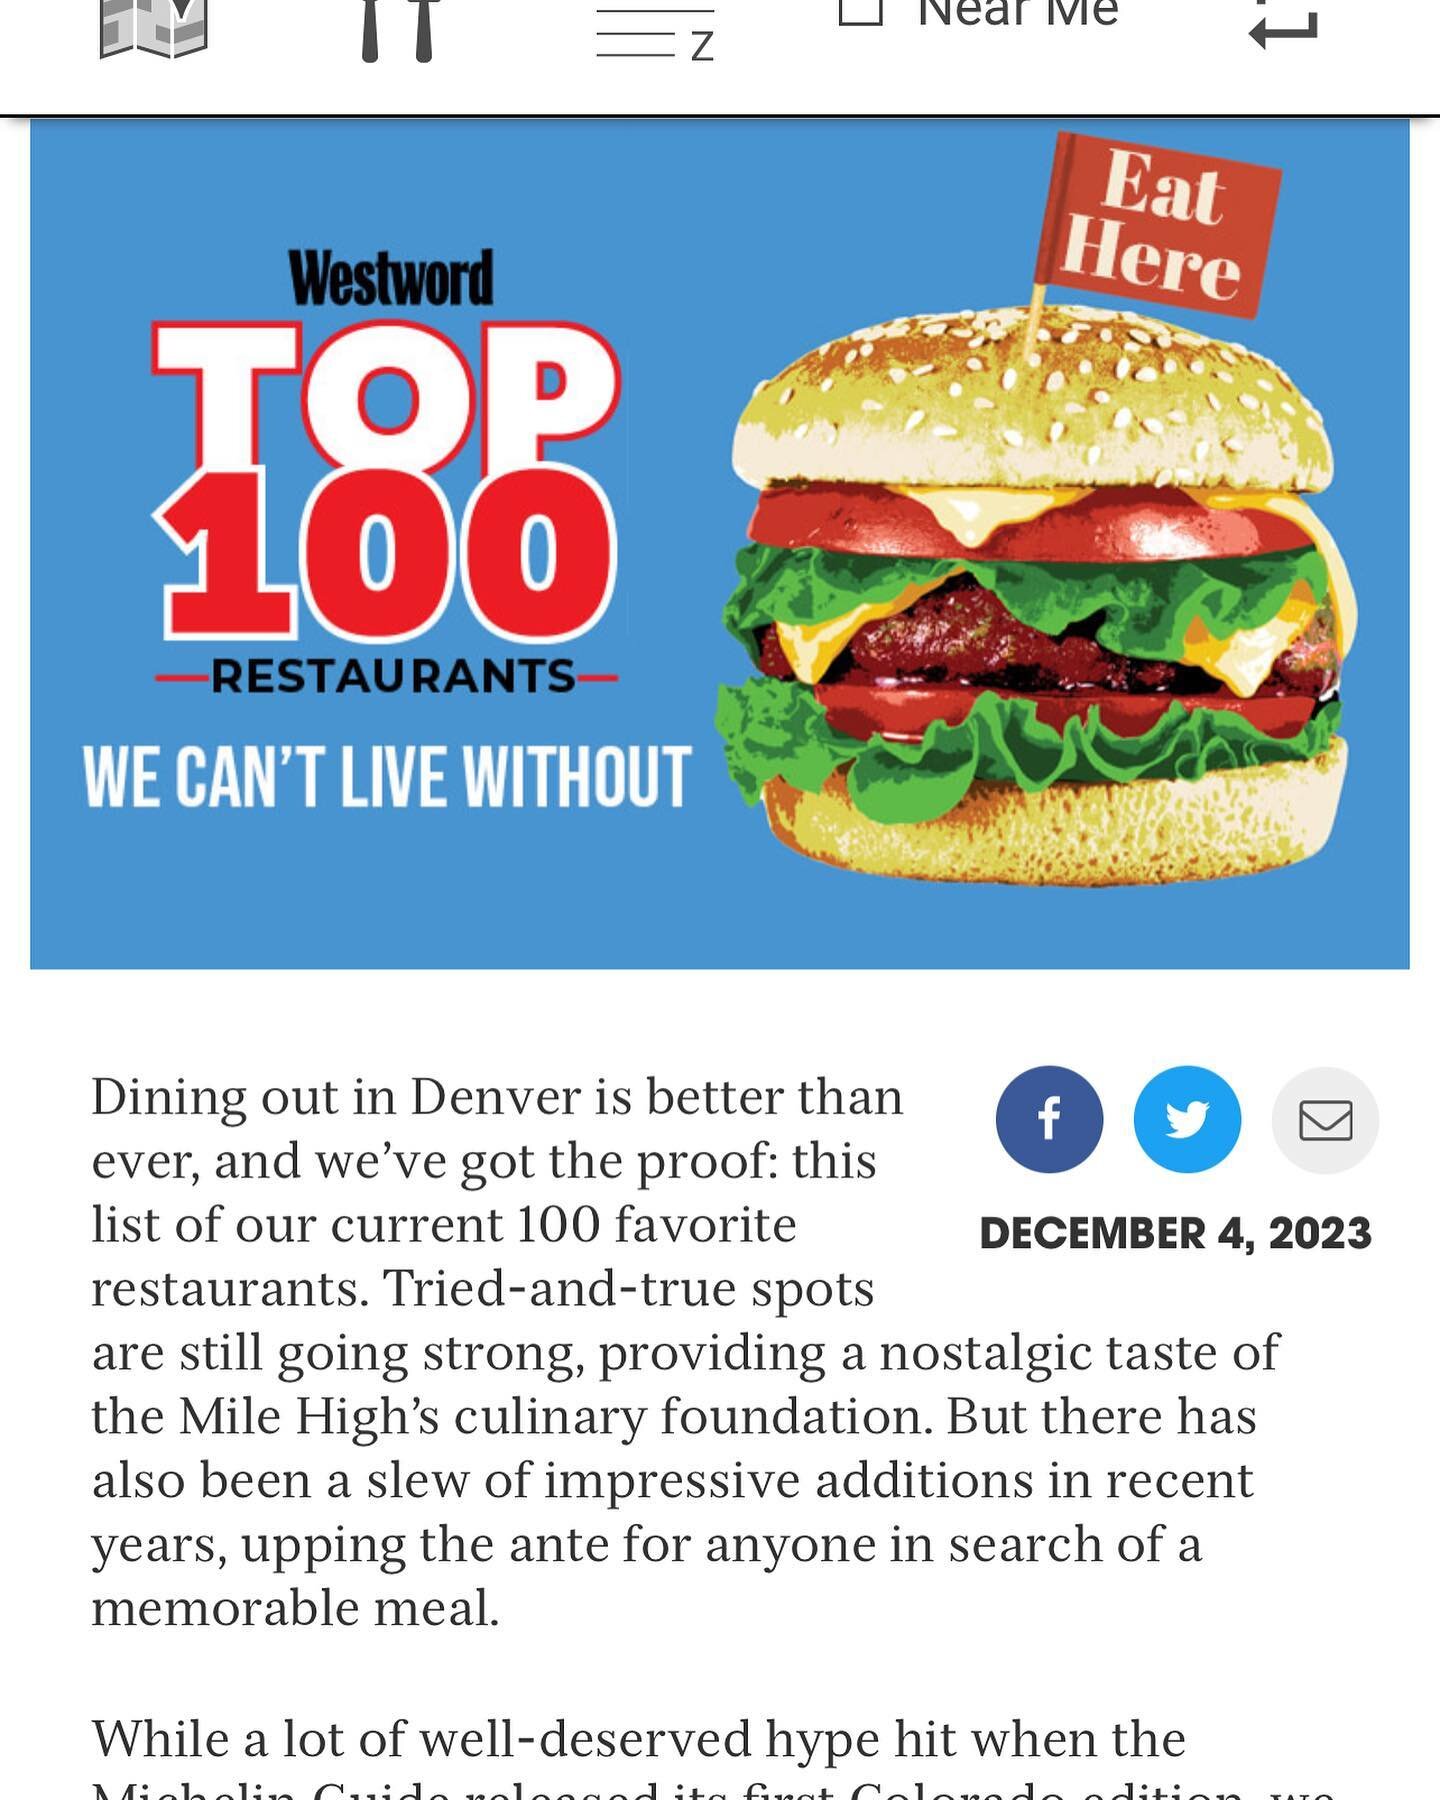 Thank you so much @mollydbu and @denverwestword for adding The Porchetta House to this amazing list!!! It is such an honor to be mentioned with all these amazing restaurants!!! Congratulations to all who made the list!! This is amazing!! https://www.